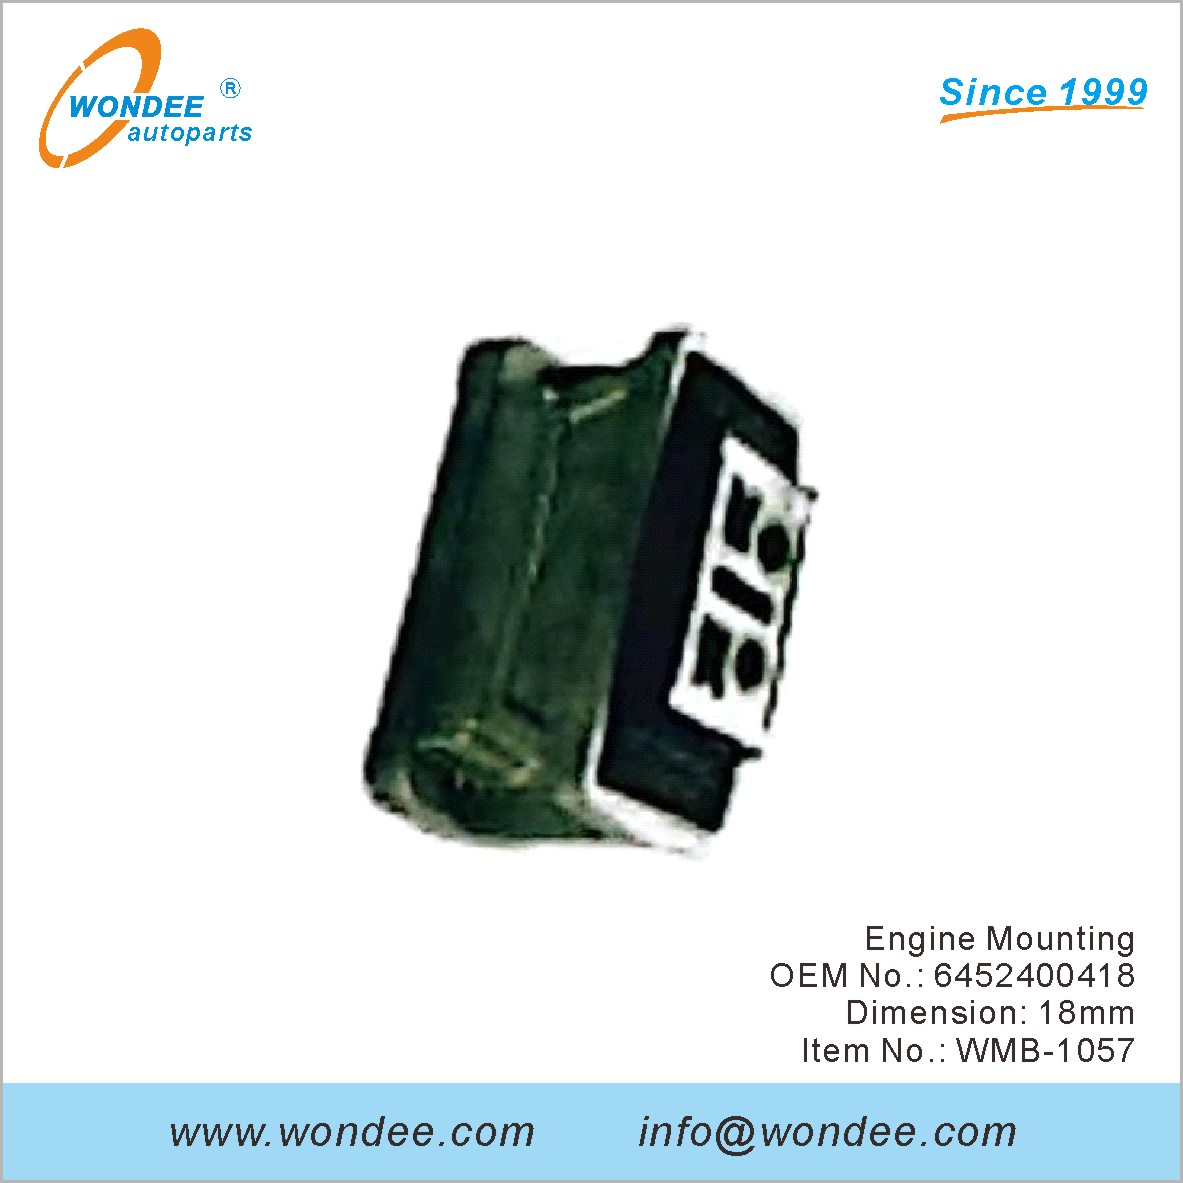 Engine Mounting OEM 6452400418 for Benz from WONDEE